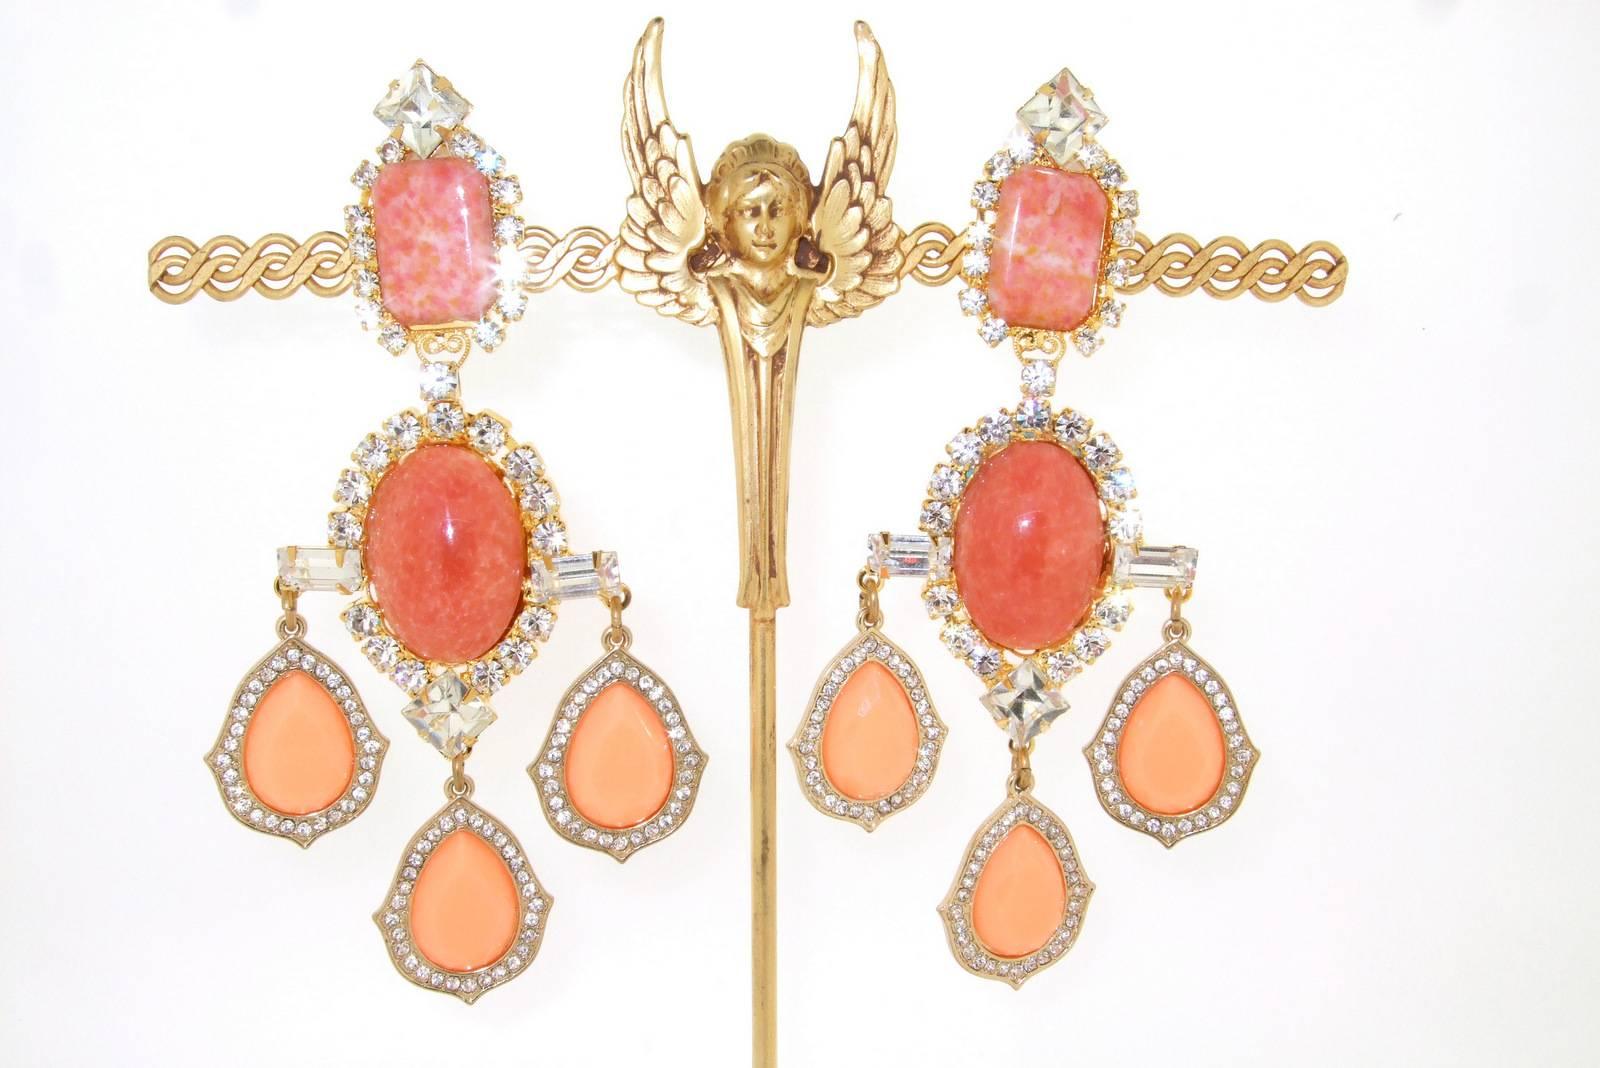 A beautiful pair of clip on statement earrings by Larry Vrba in gold toned costume metal set with pink agate stones and peach coral glass, with clear crystals edging. 

They measure 11.5 cm drop by 5.8 cm at the widest point, 2cm wide at the top.